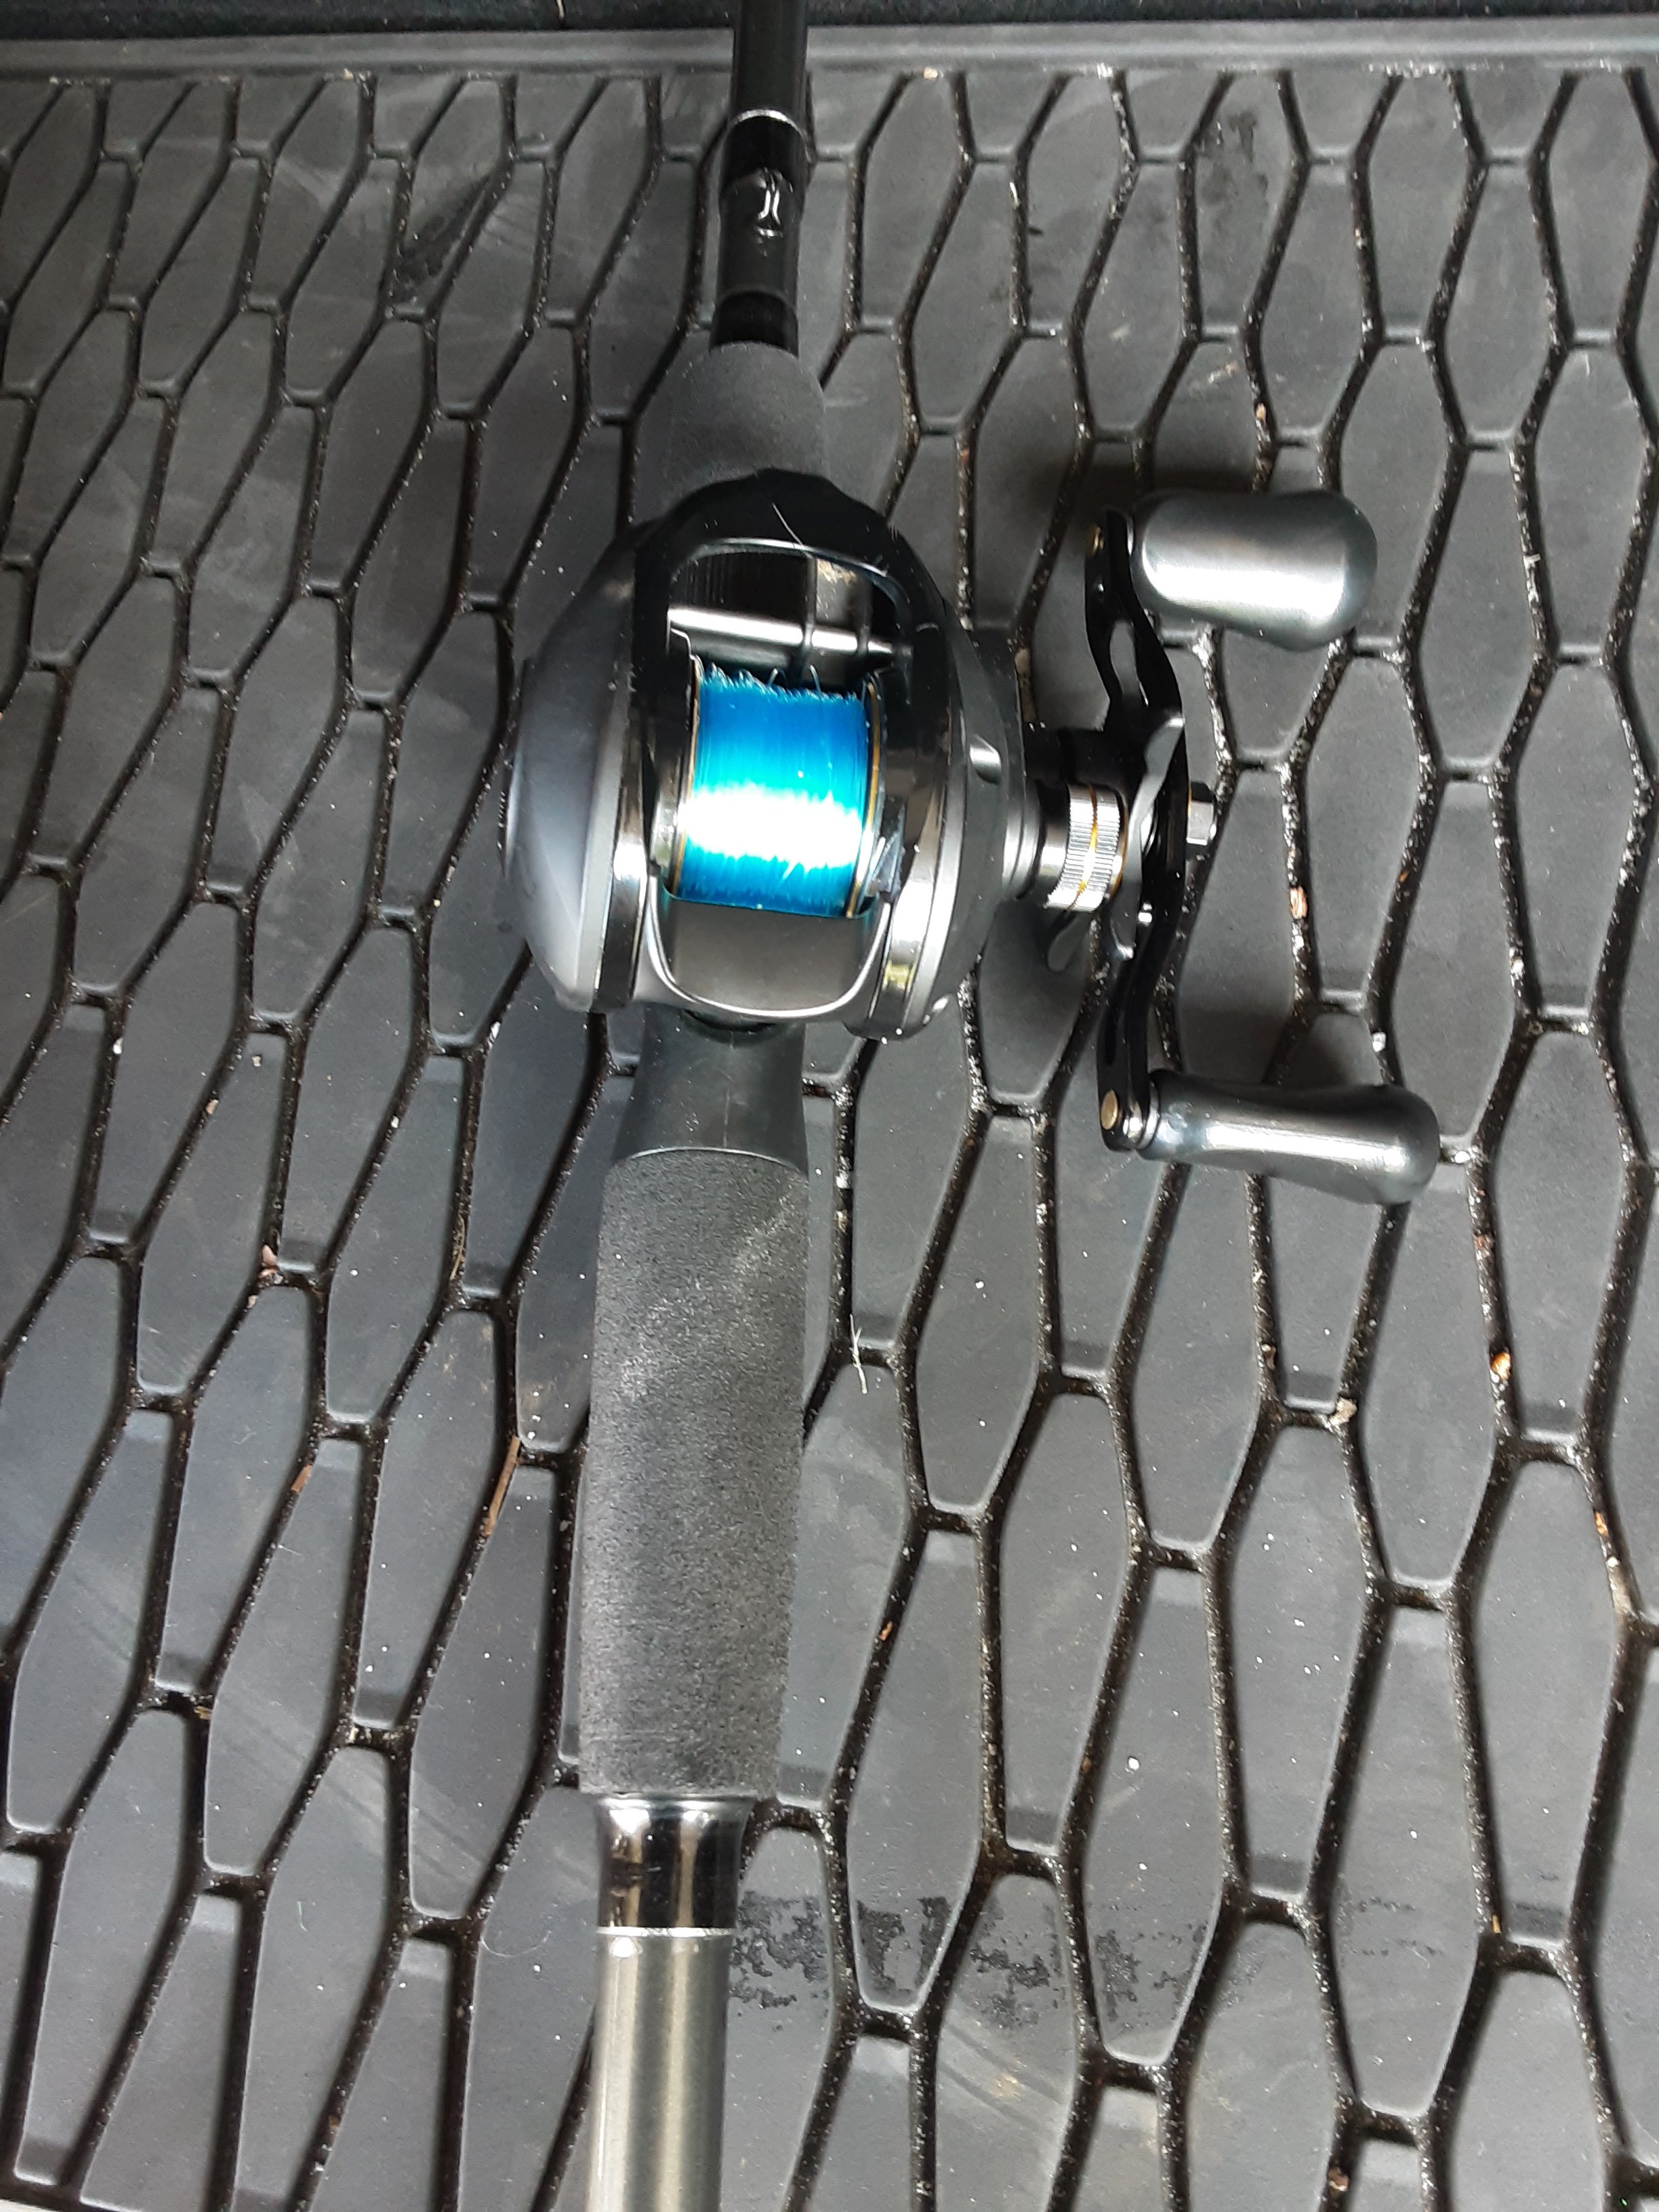 krazy cast spinning rod and reel